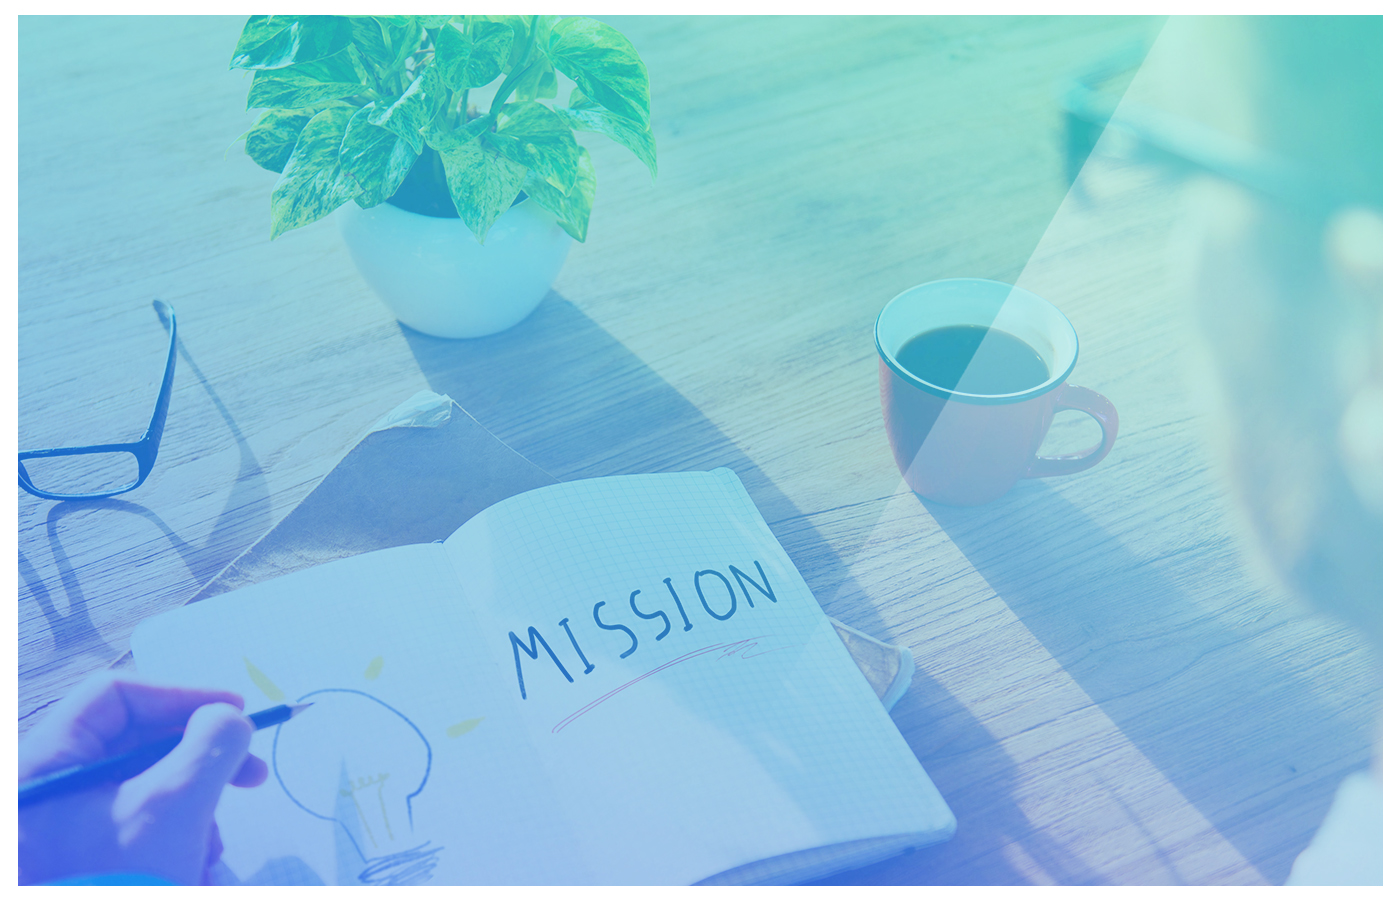 4 things to consider when creating a mission statement